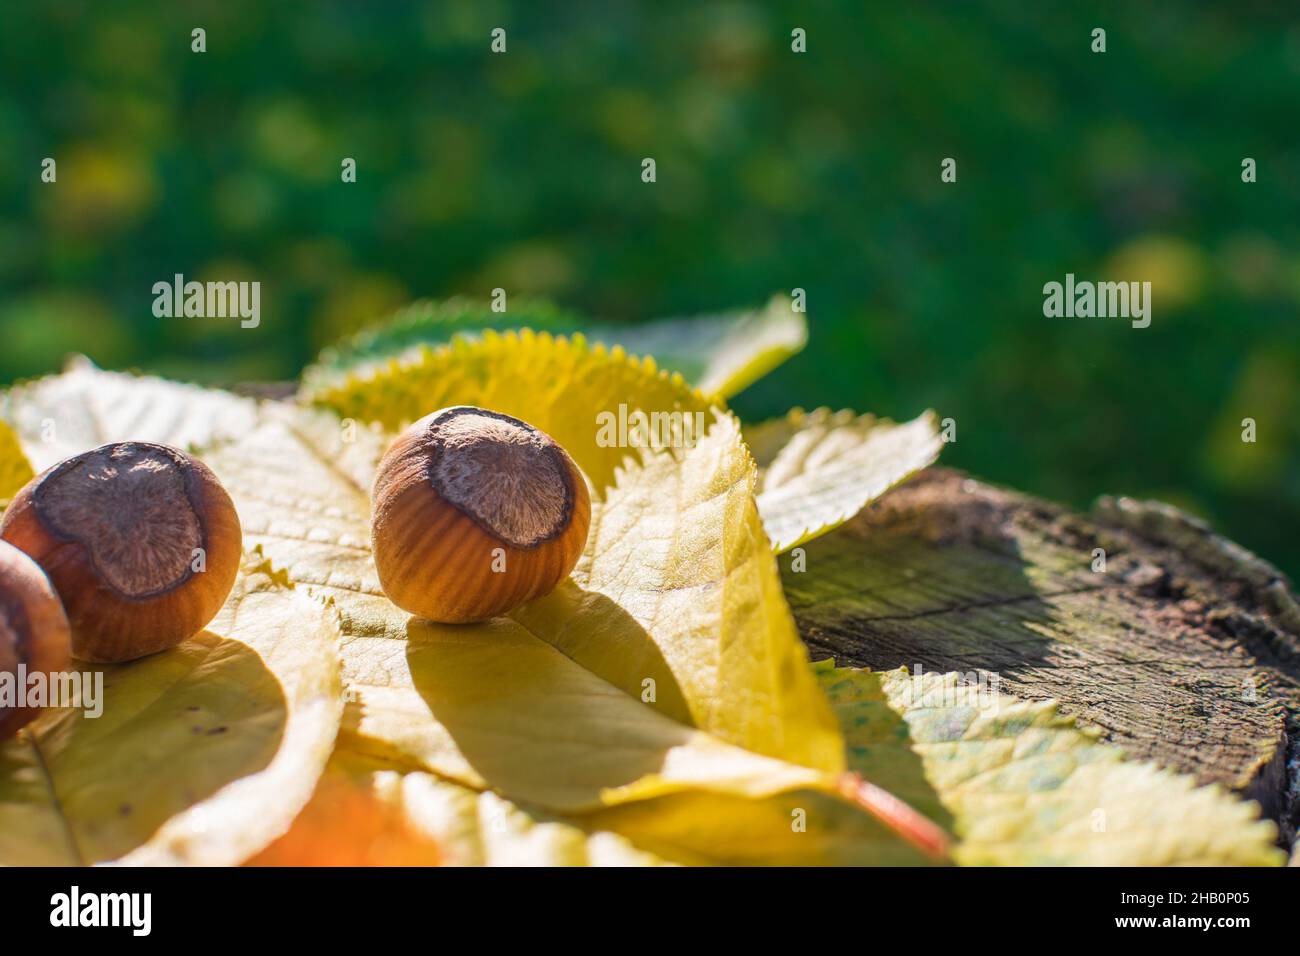 Hazelnuts Among Fall Colored Leaves In The Forest Enlightened by Sunset Stock Photo